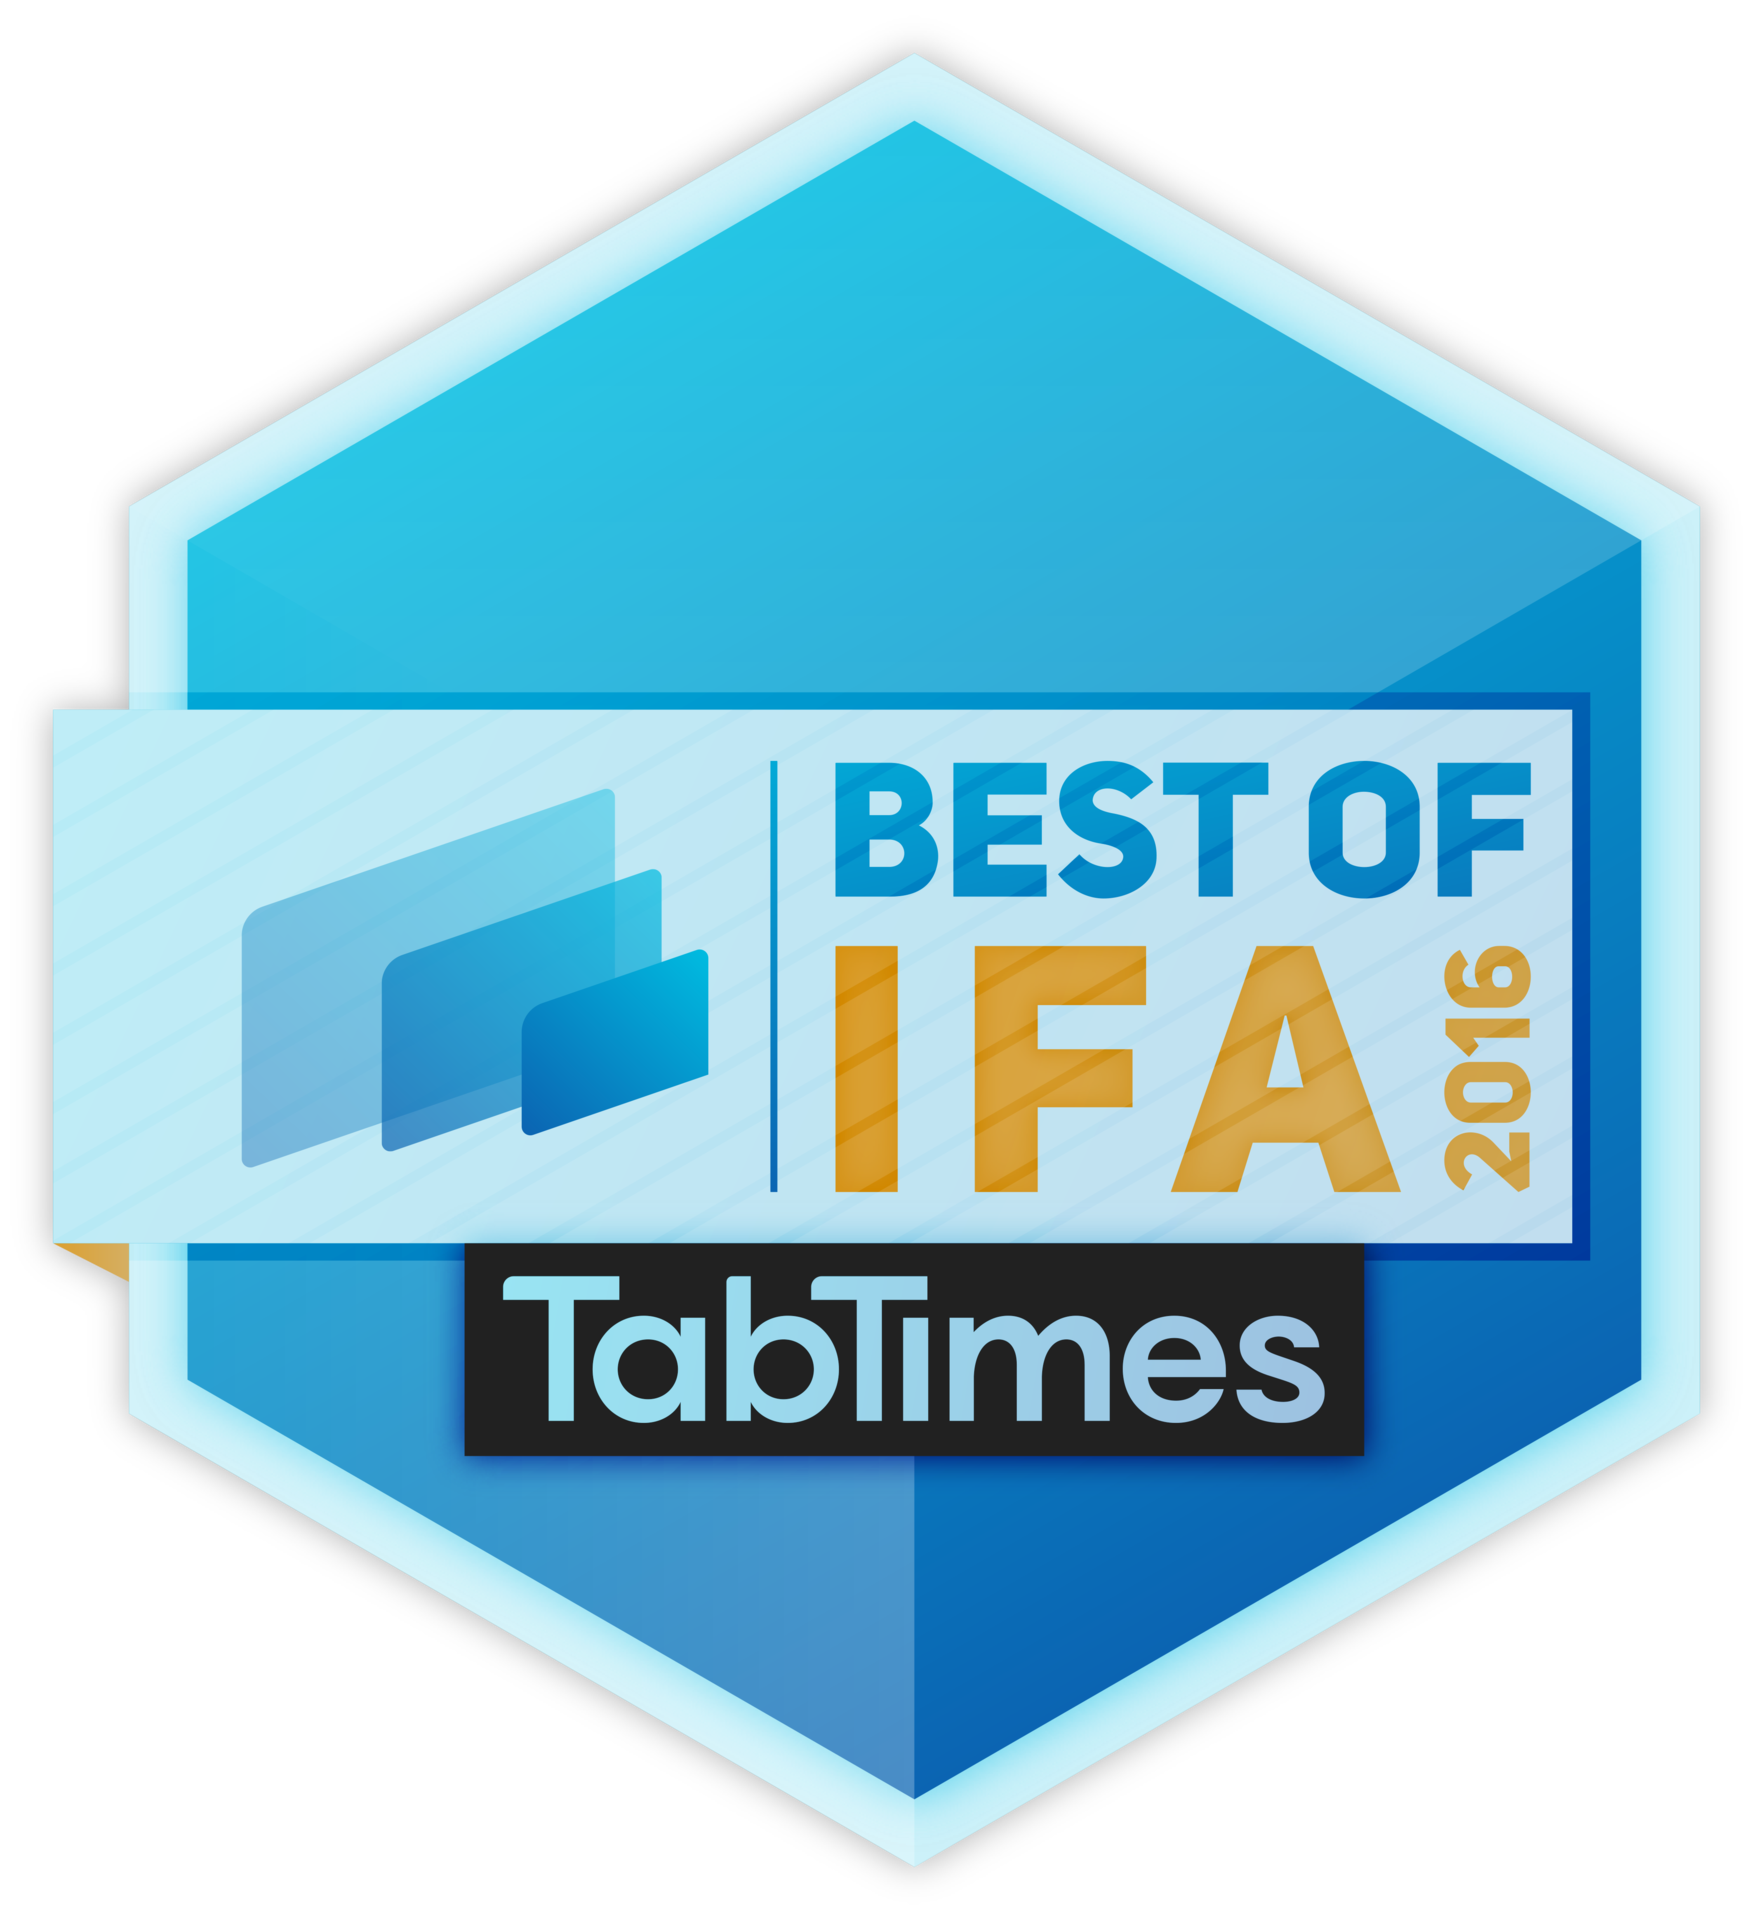 Best of IFA 2016 TabTimes